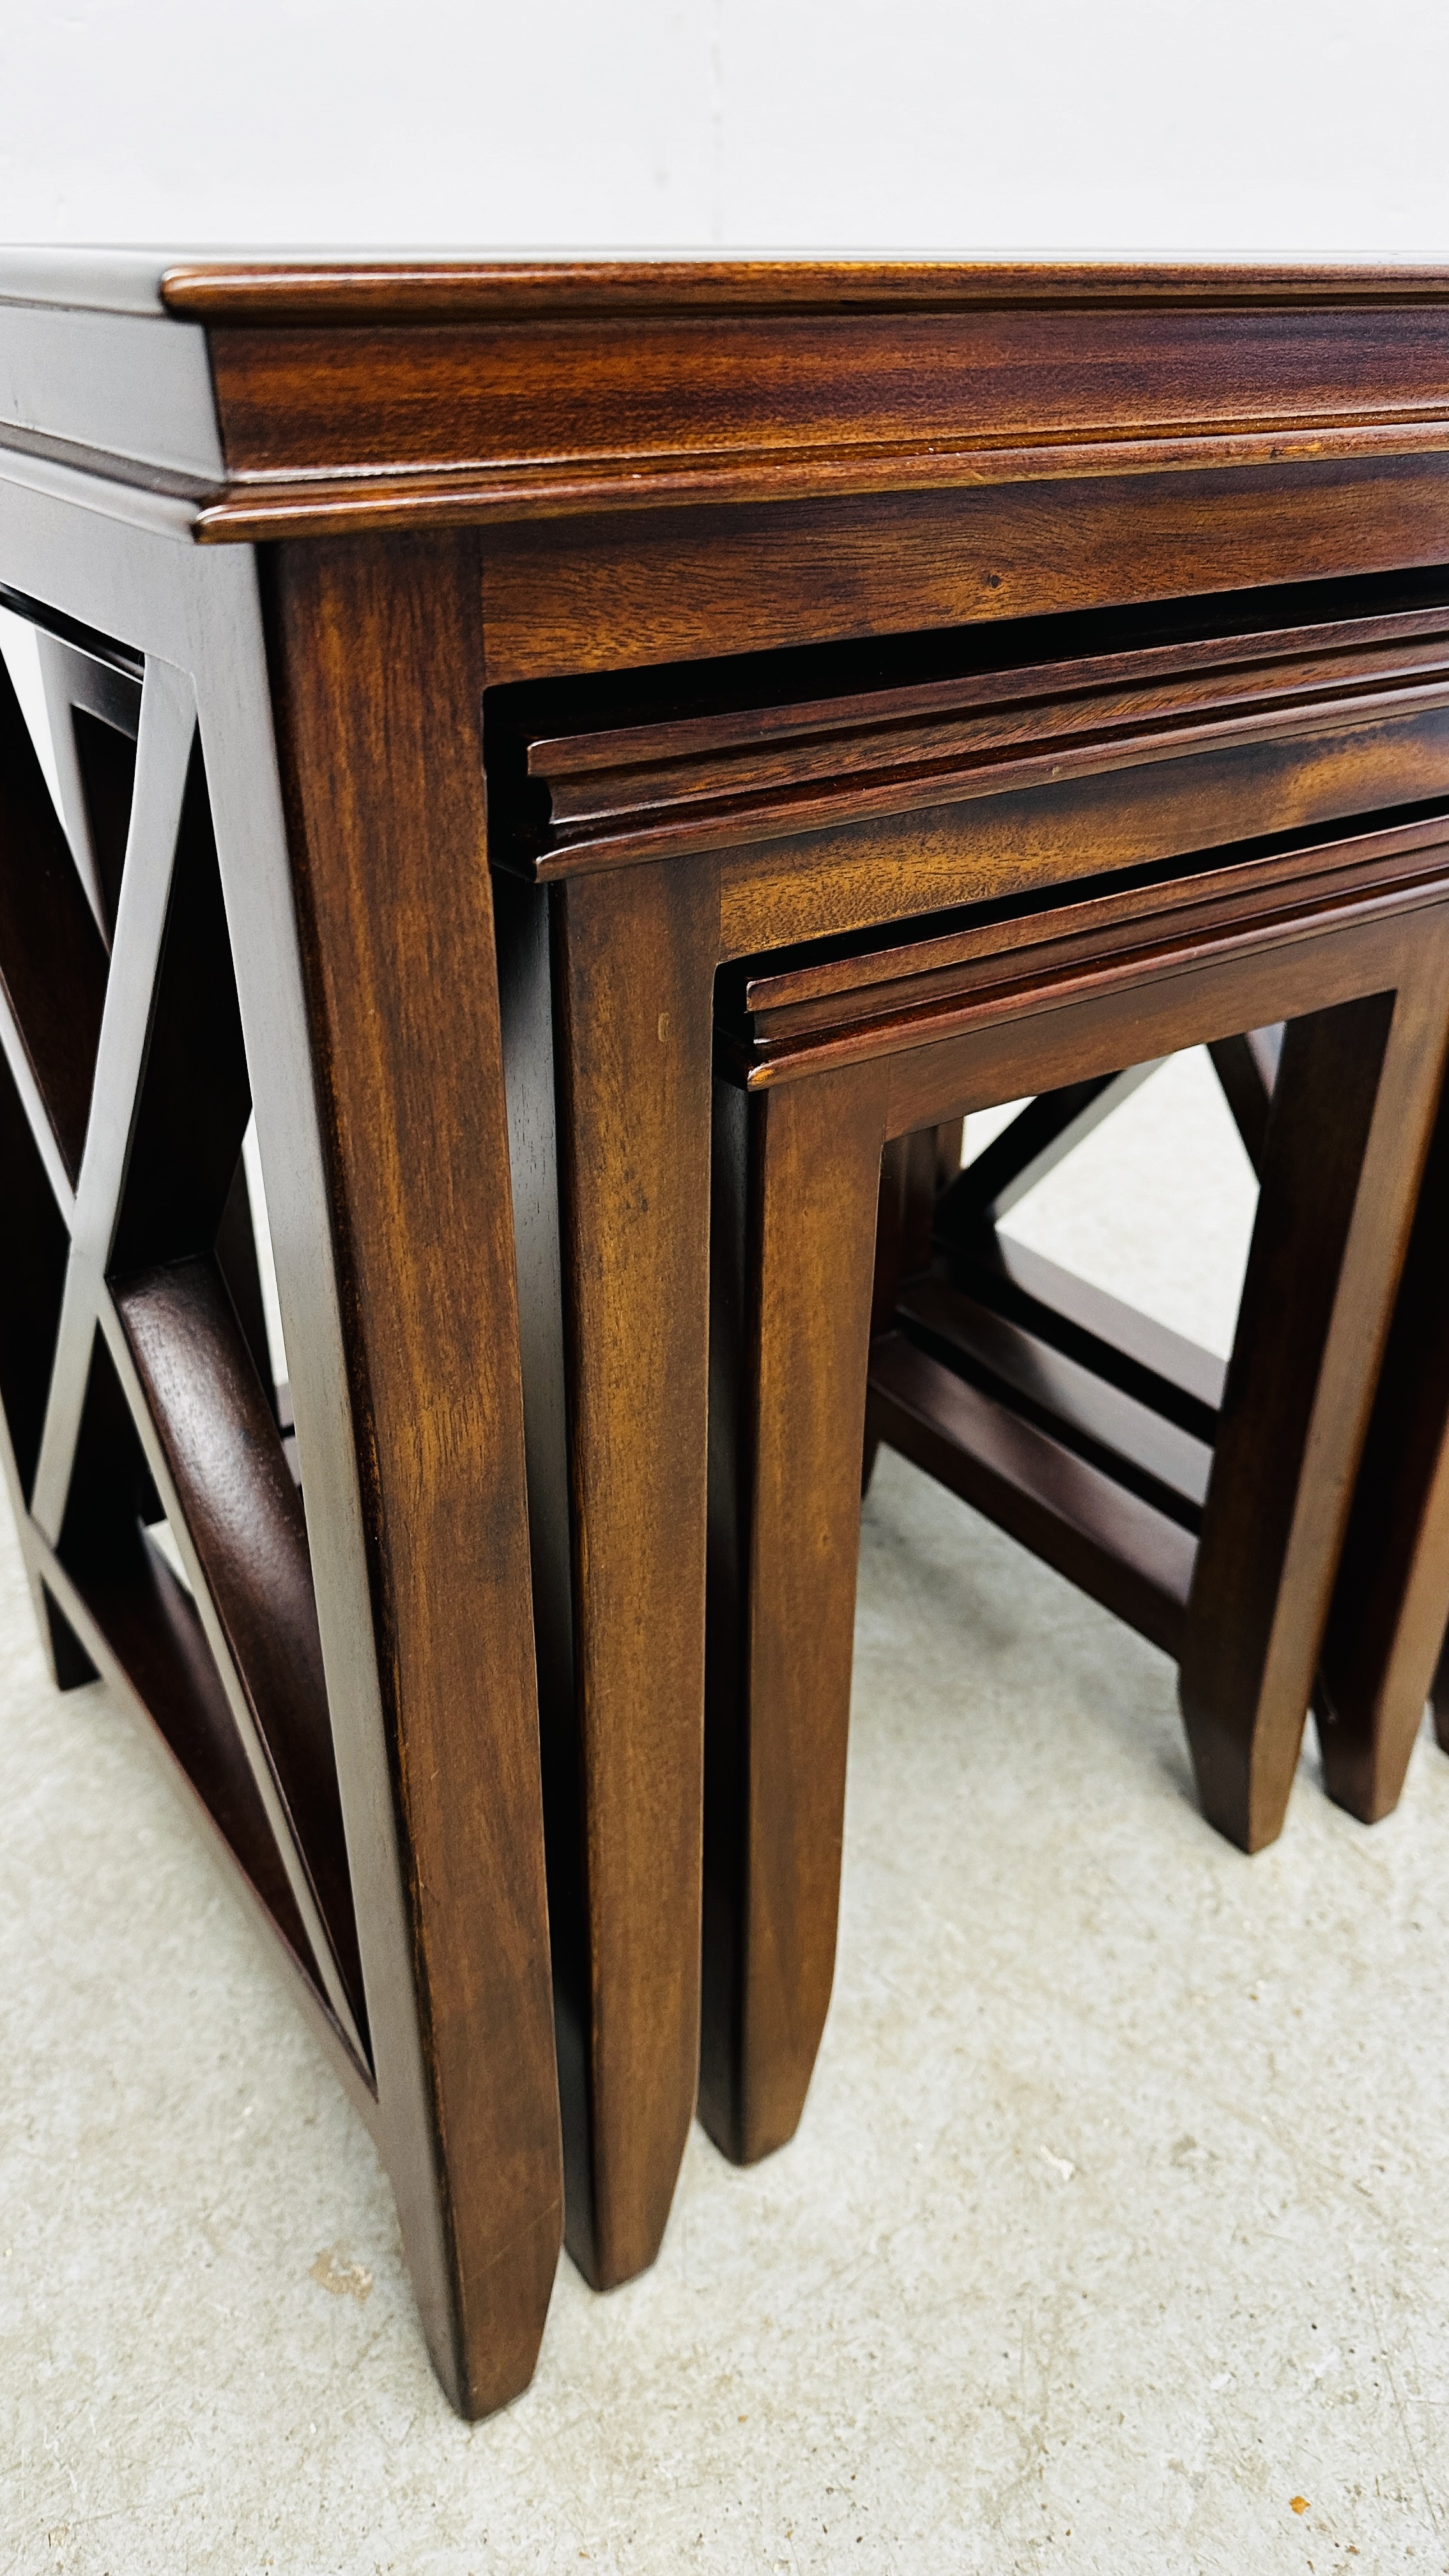 A NEST OF 3 HARDWOOD OCCASIONAL TABLES ALONG WITH A MATCHING SINGLE DRAWER LAMP TABLE W 46 X 46 X - Image 10 of 16